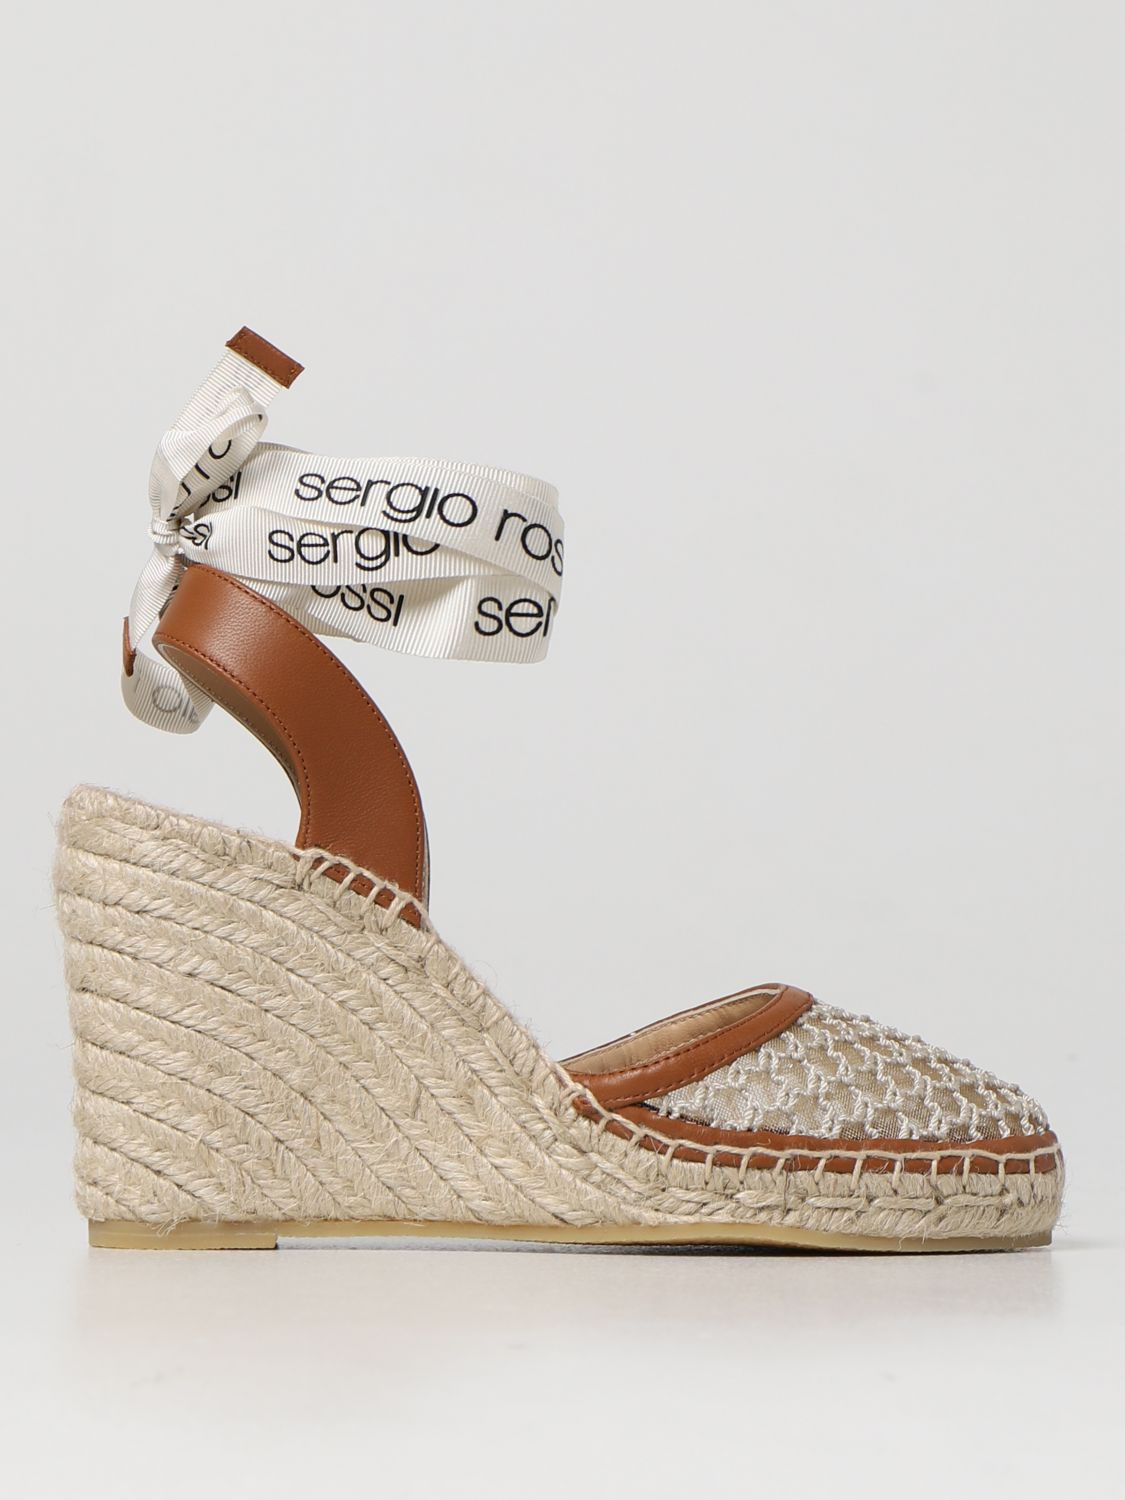 Wedge shoes Sergio Rossi: Sergio Rossi Filicudi leather wedges leather 1